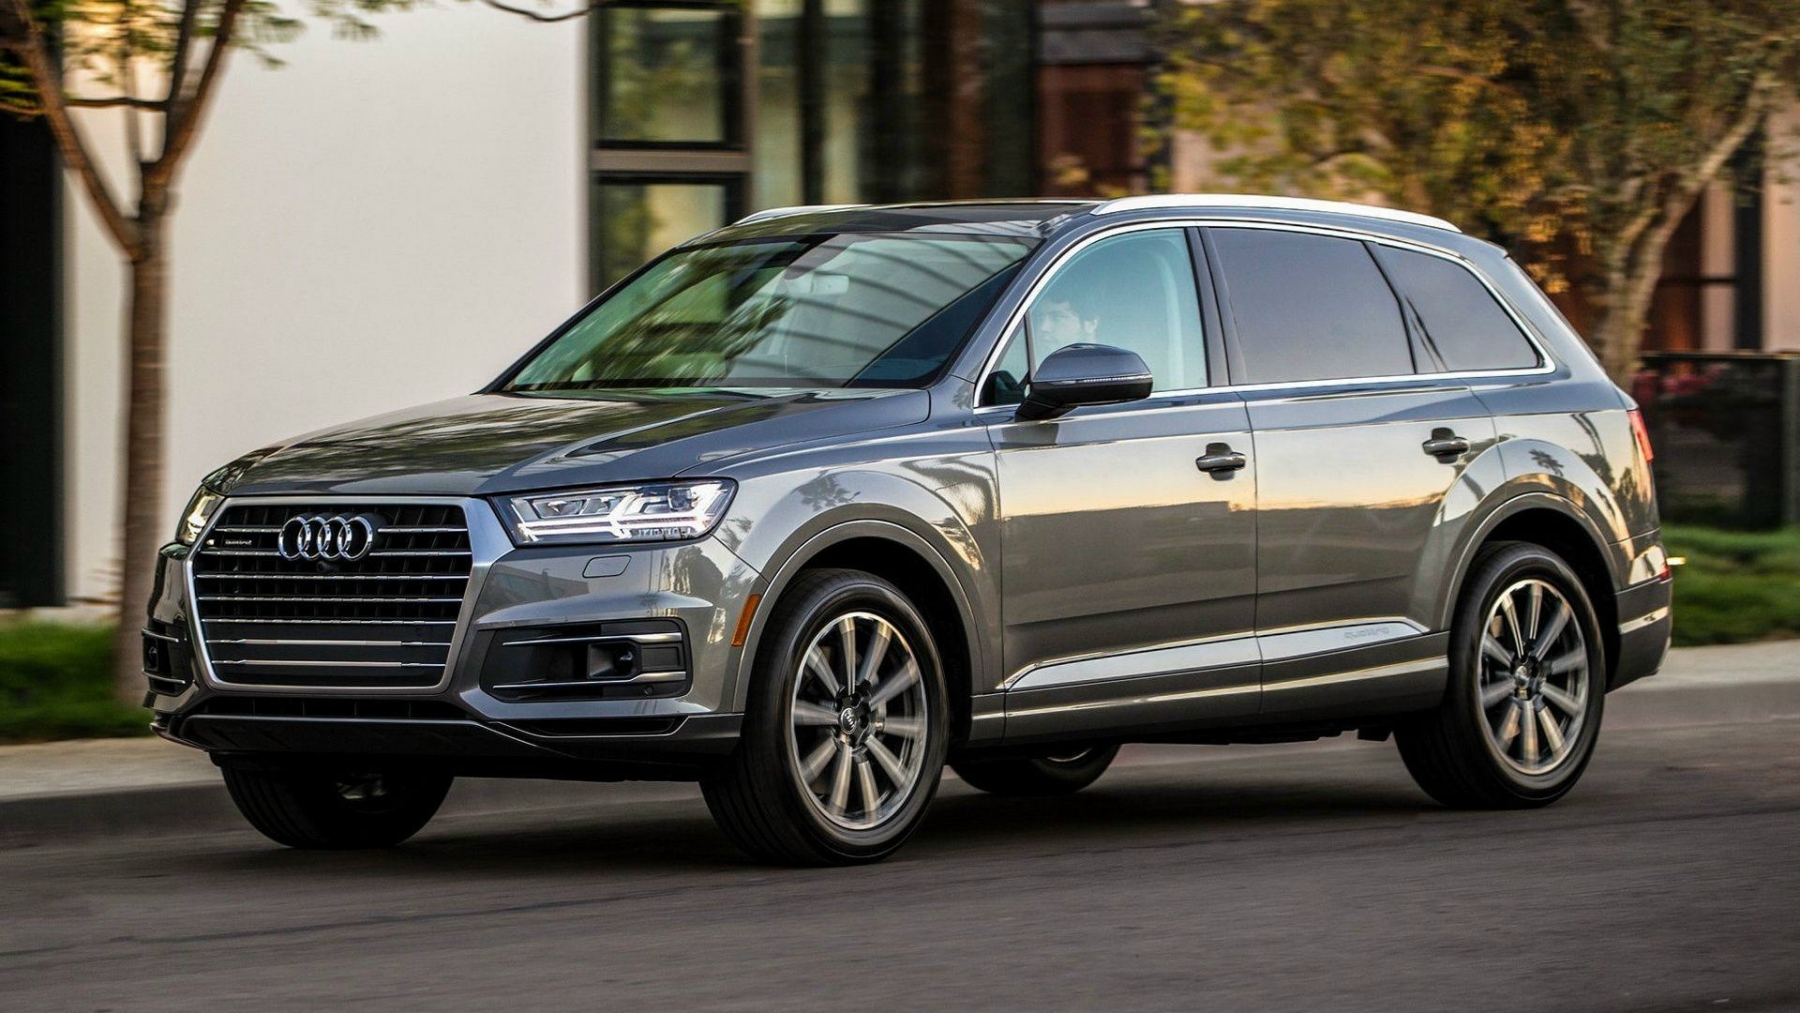 Audi Q7 HD Wallpapers | Background Images | Photos ...